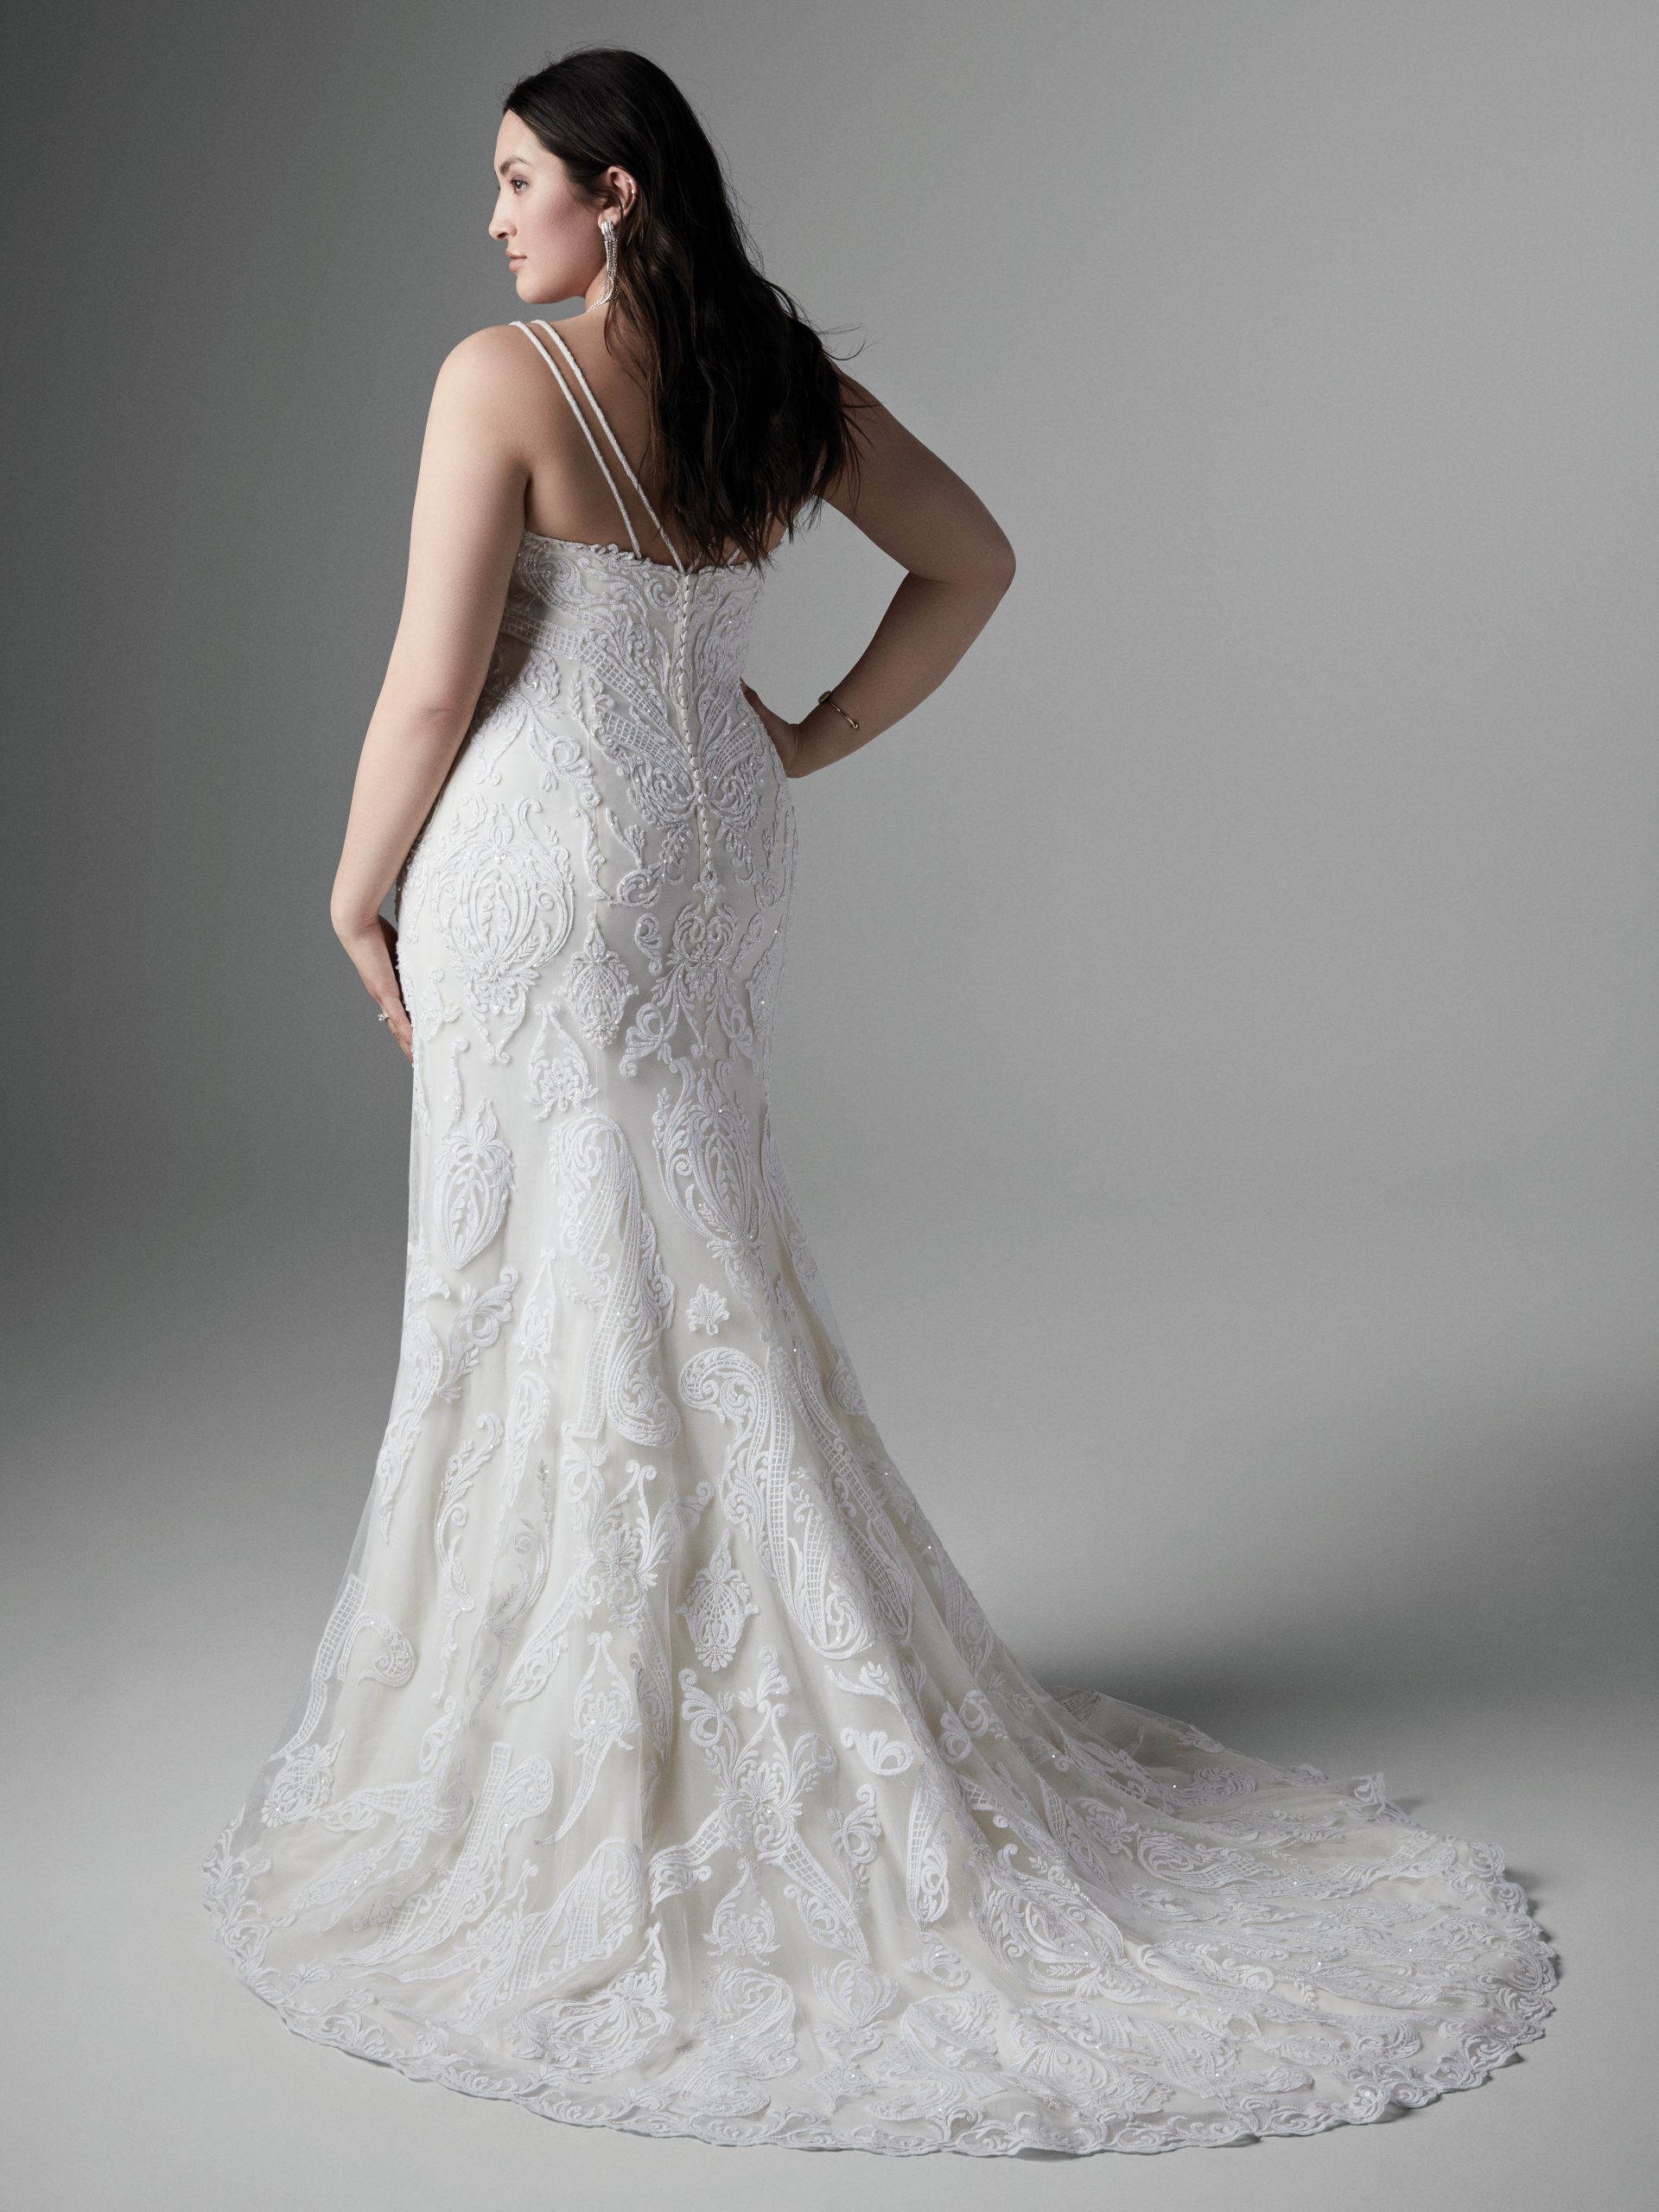 Plus Size Lace Sheath Wedding Gown Called Devon by Sottero and Midgley